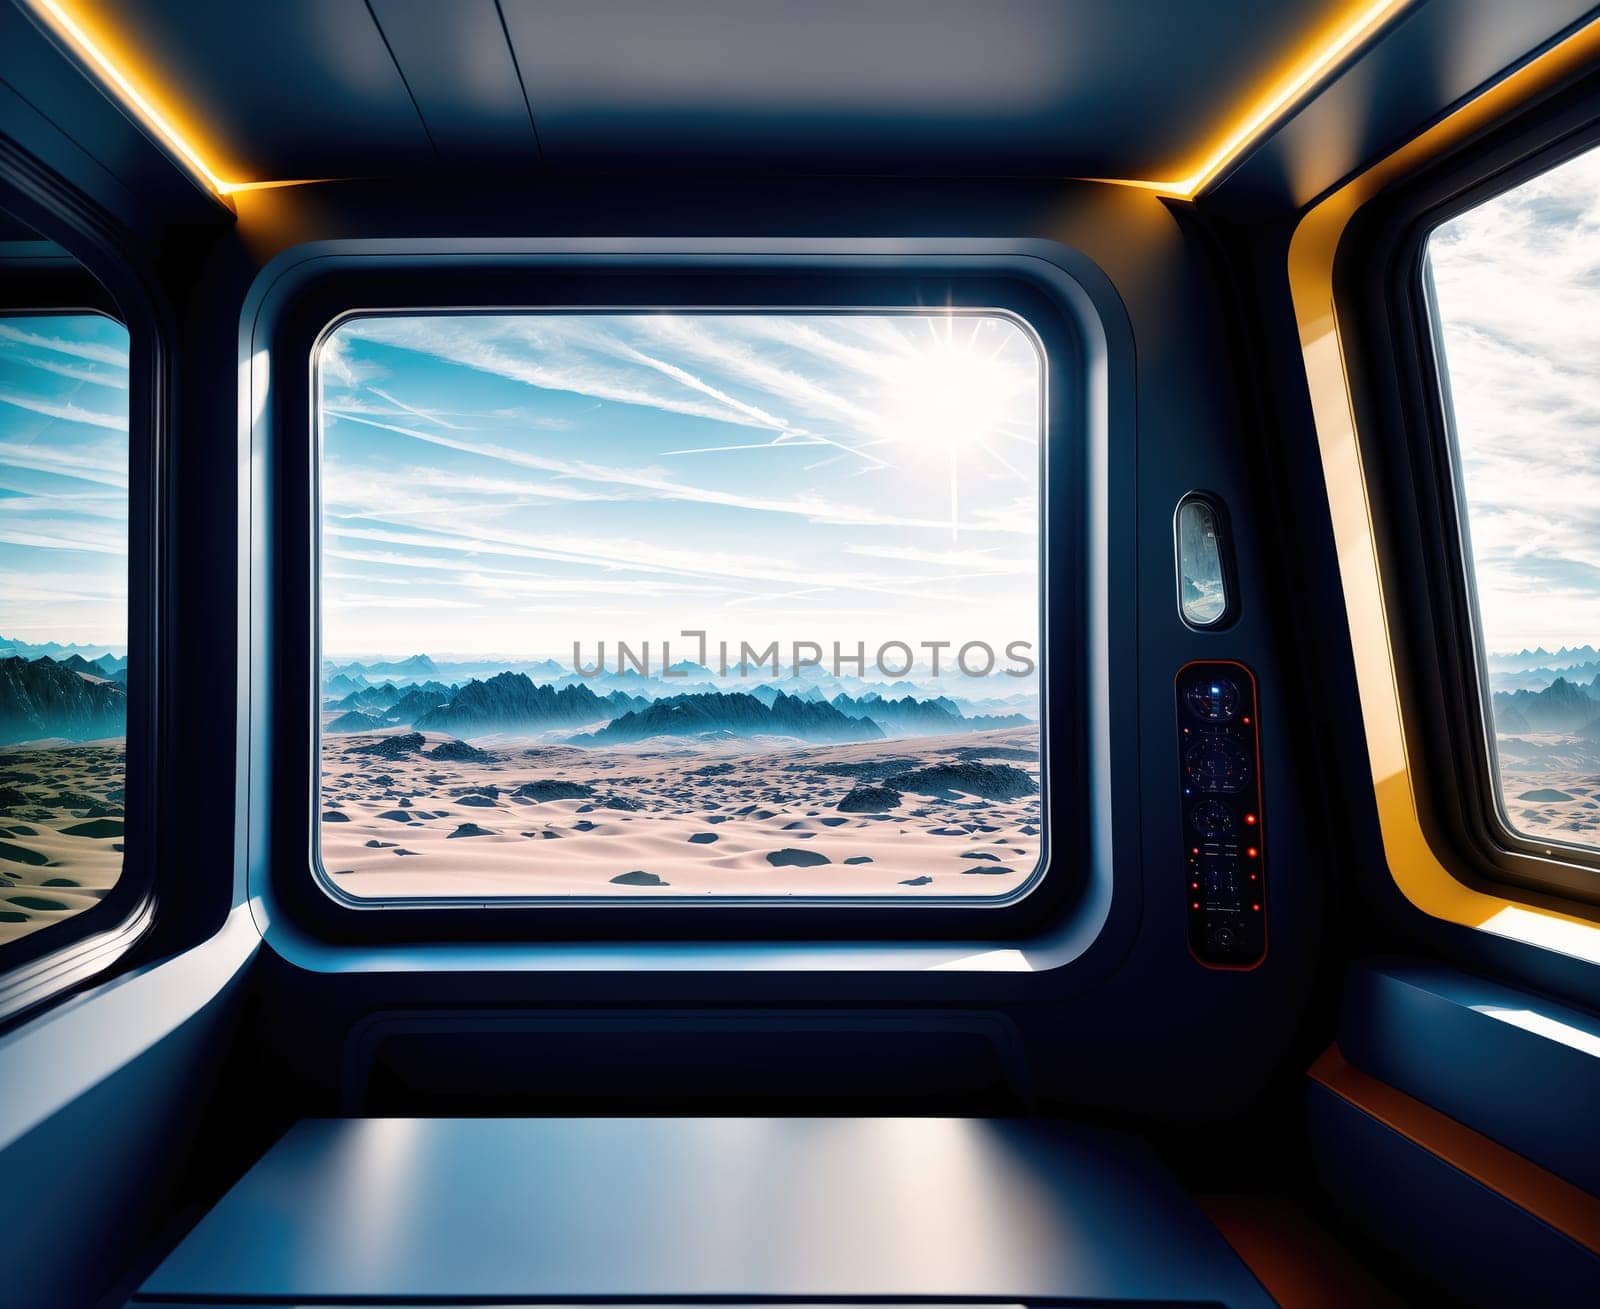 The image shows a futuristic train window with a view of a desert landscape outside.